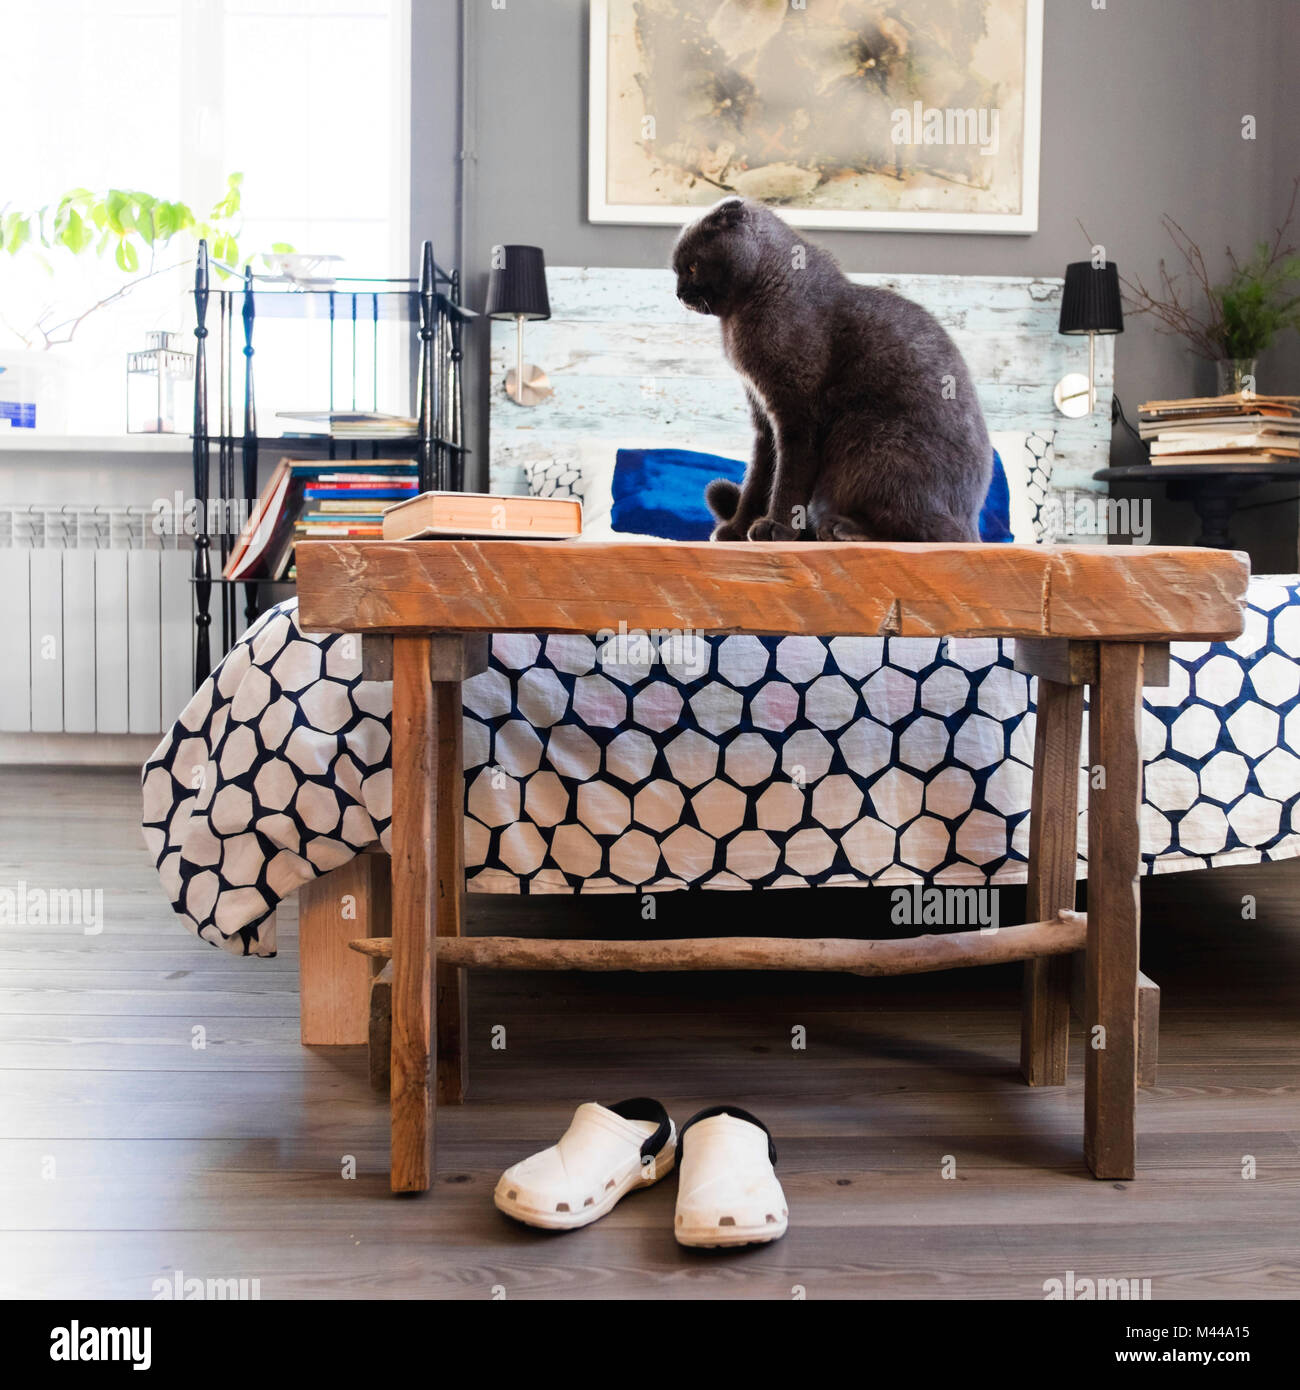 Cat on bench at end of bed Stock Photo